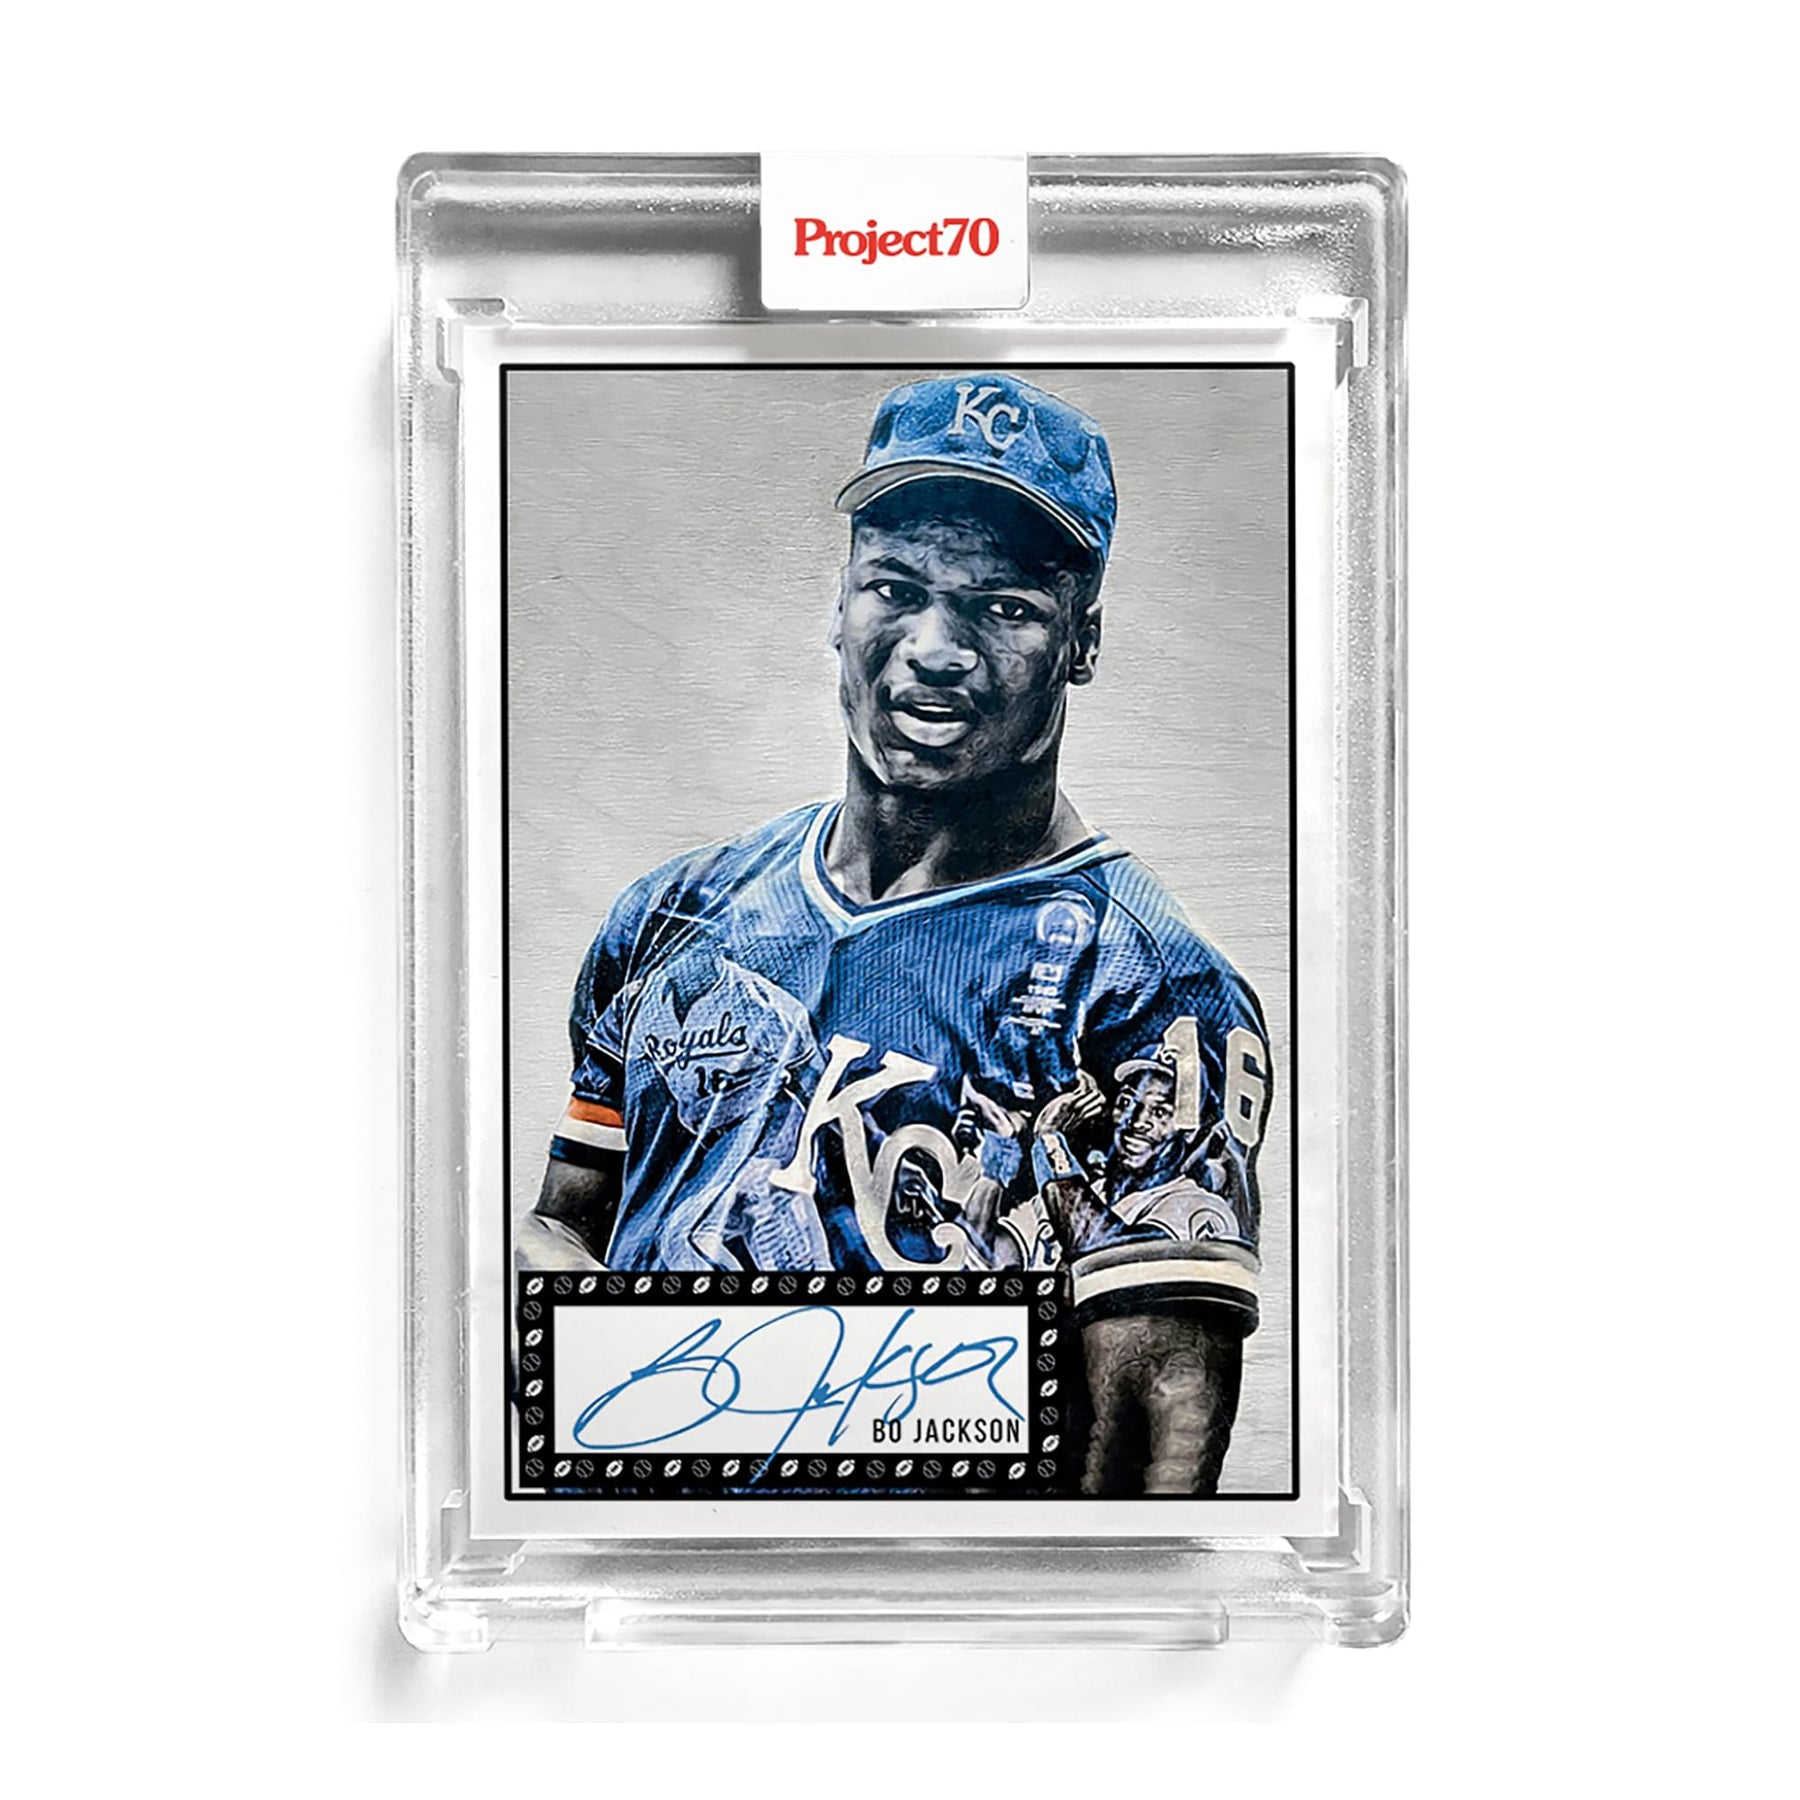 MLB Topps Project70 Card 206 | 1952 Bo Jackson by Lauren Taylor